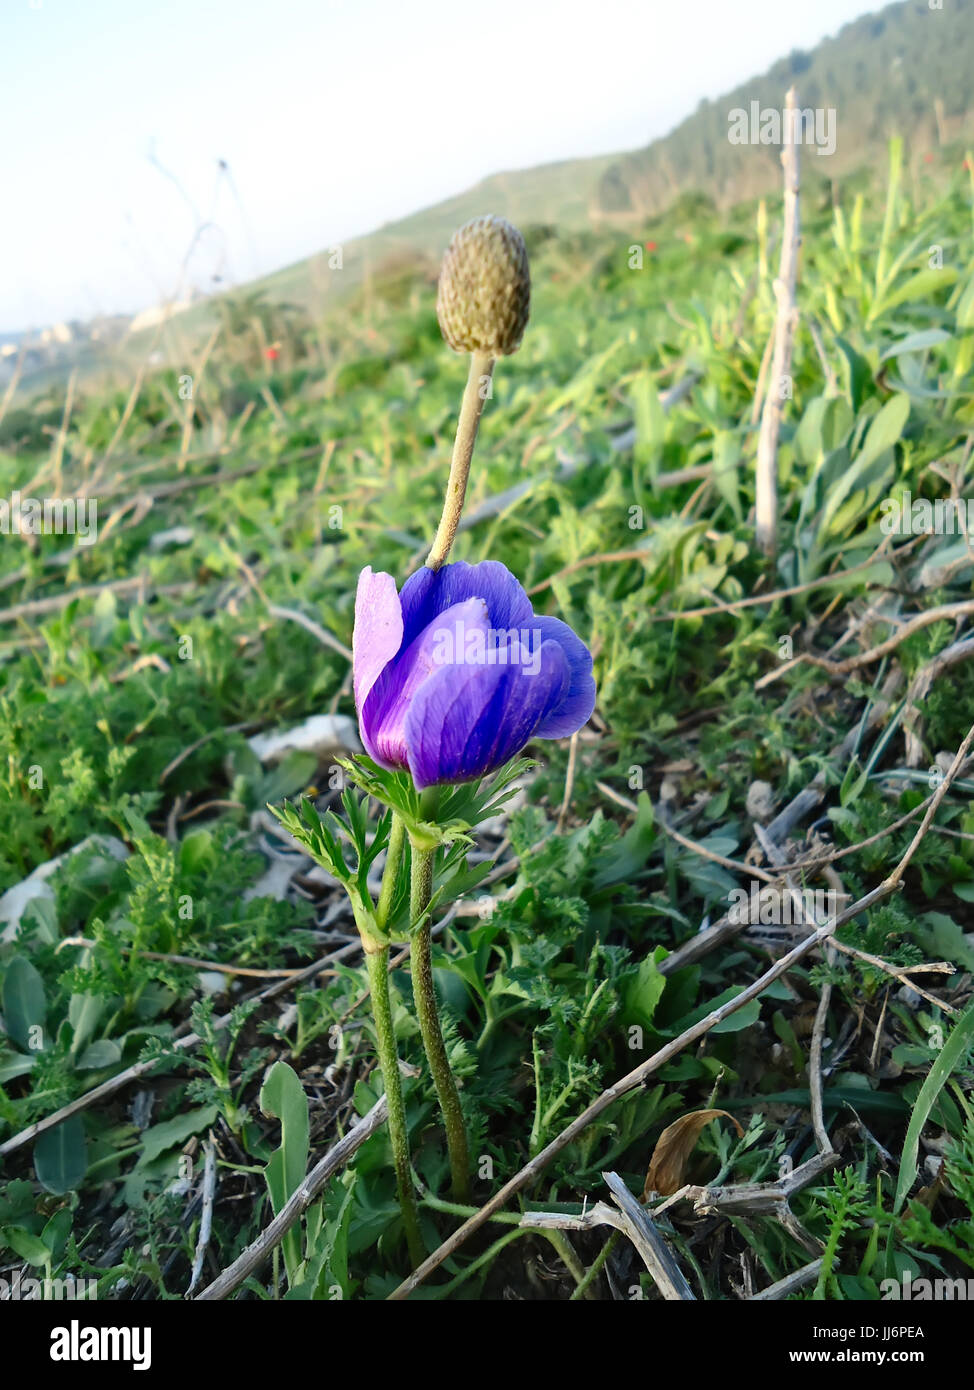 blue anemone flower with bud Stock Photo